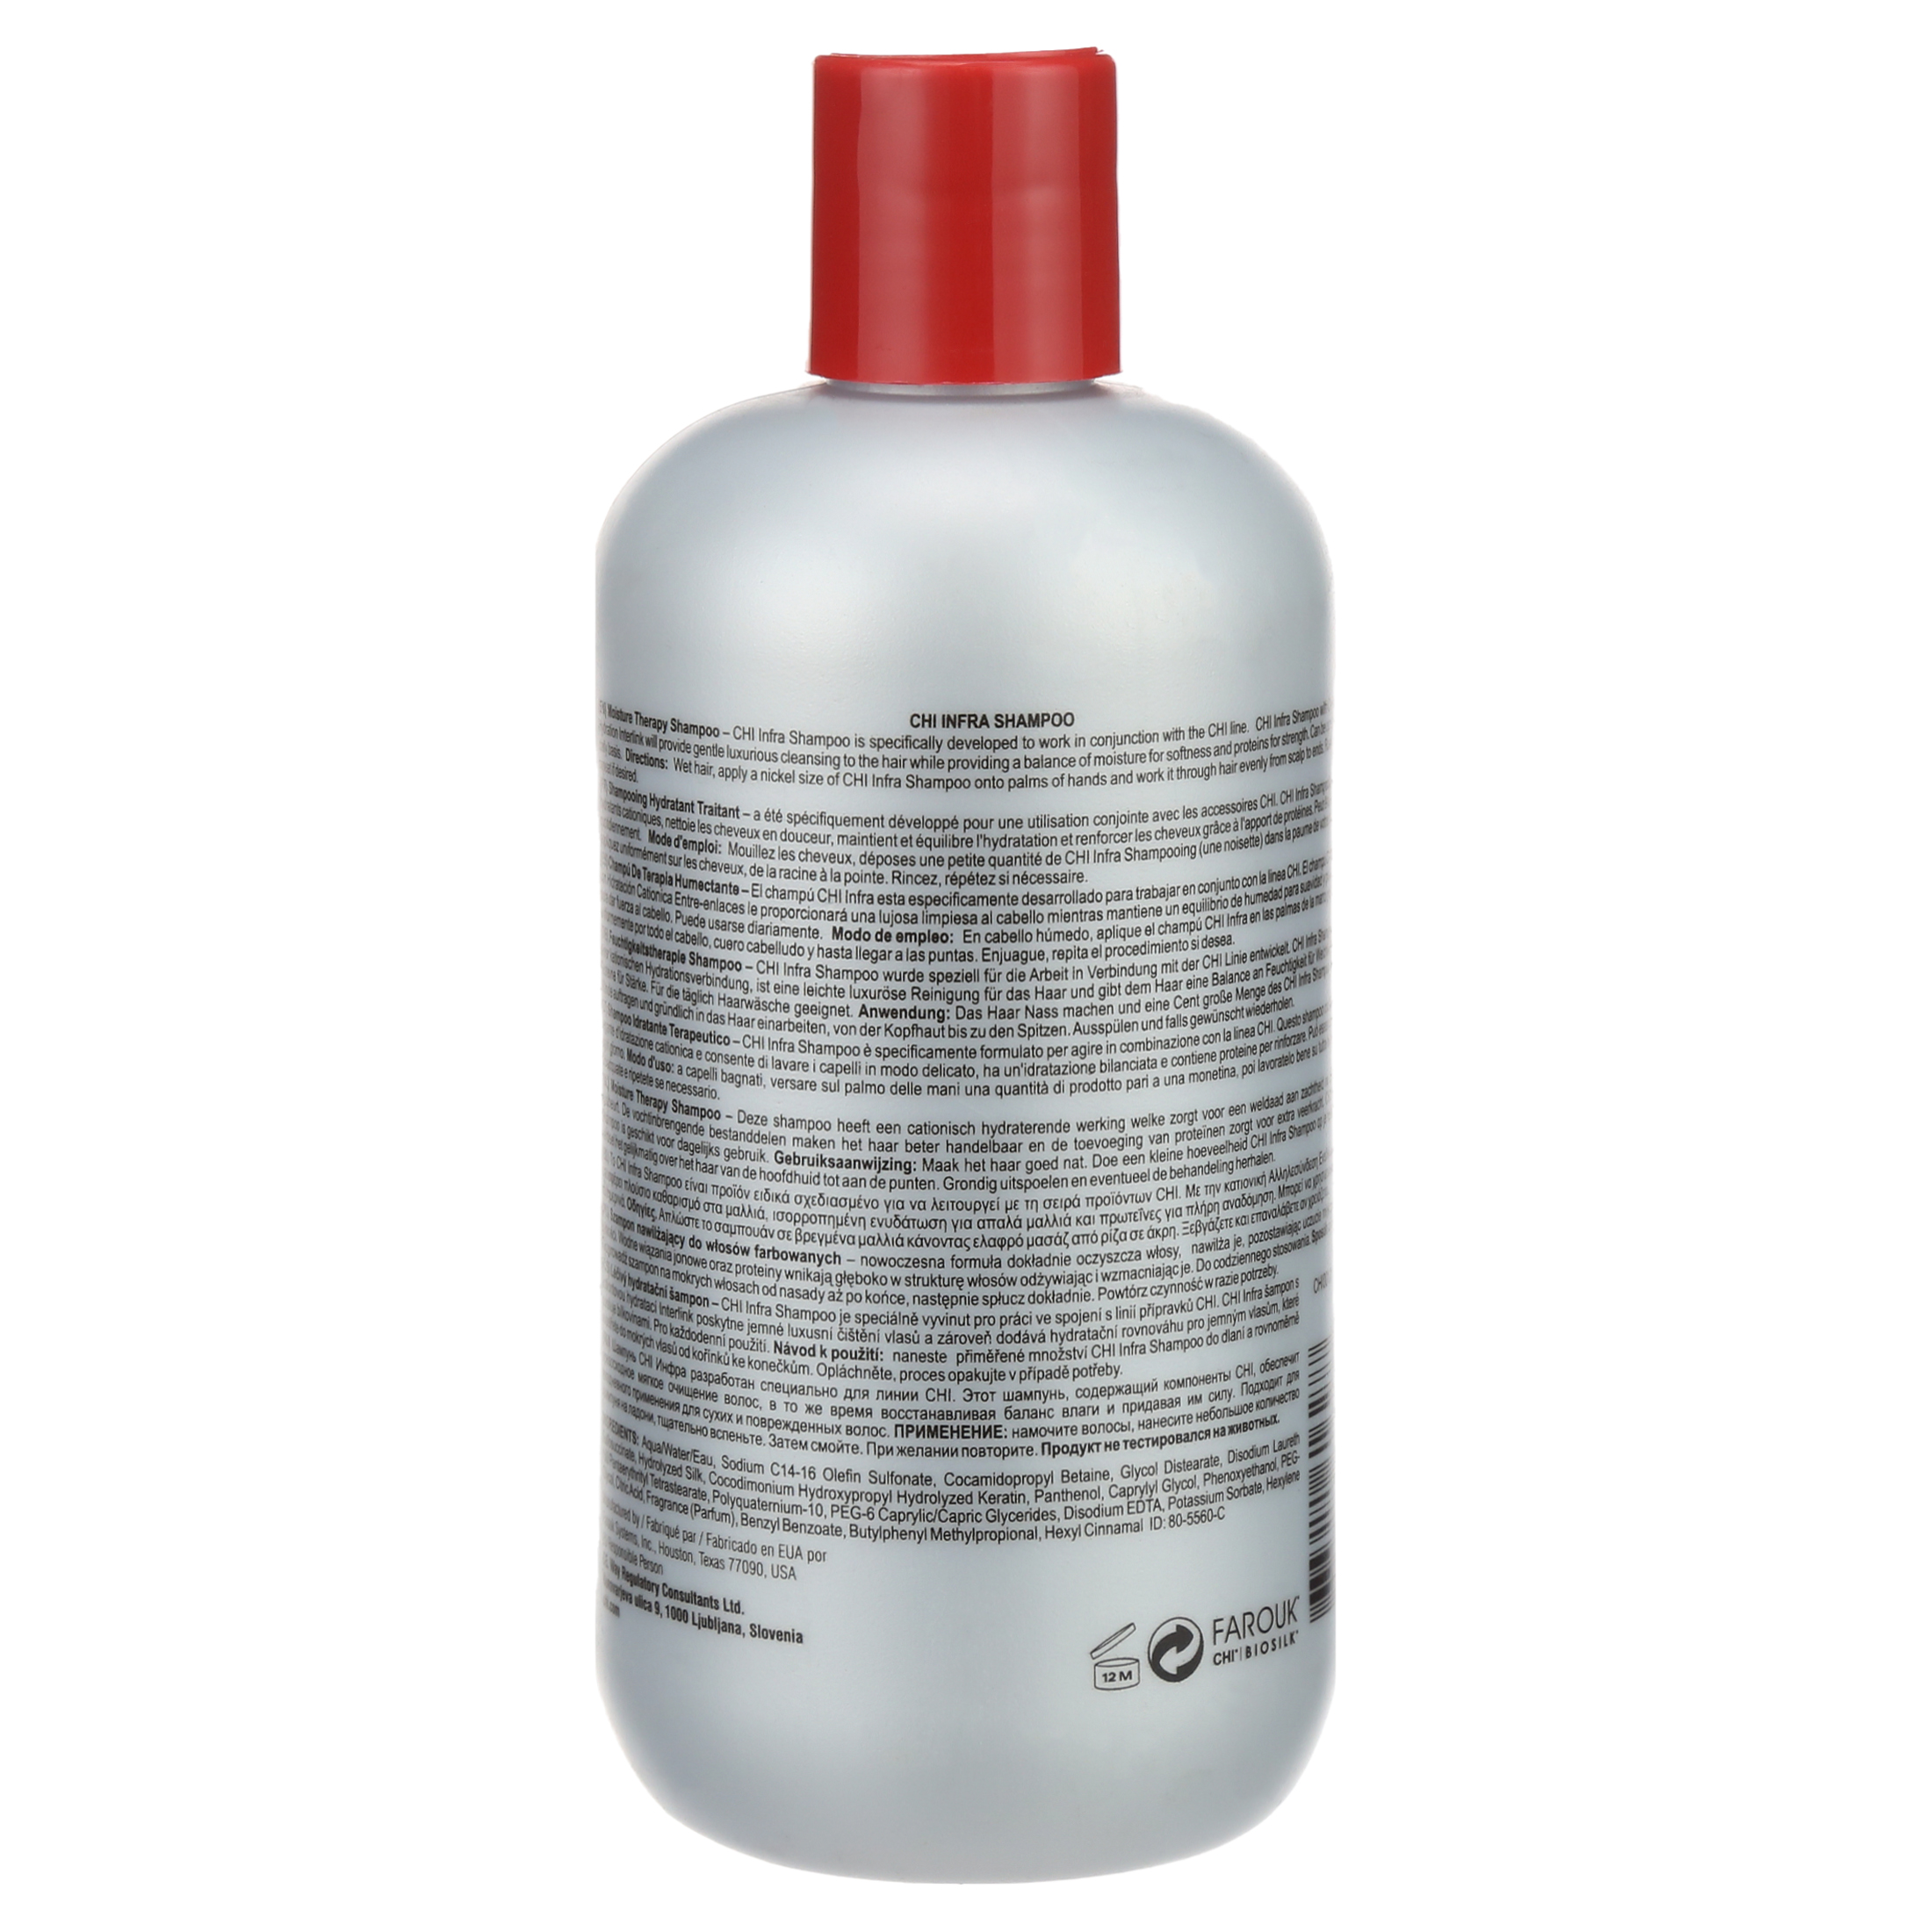 CHI Infra Moisture Therapy Shampoo 12 oz - image 3 of 7